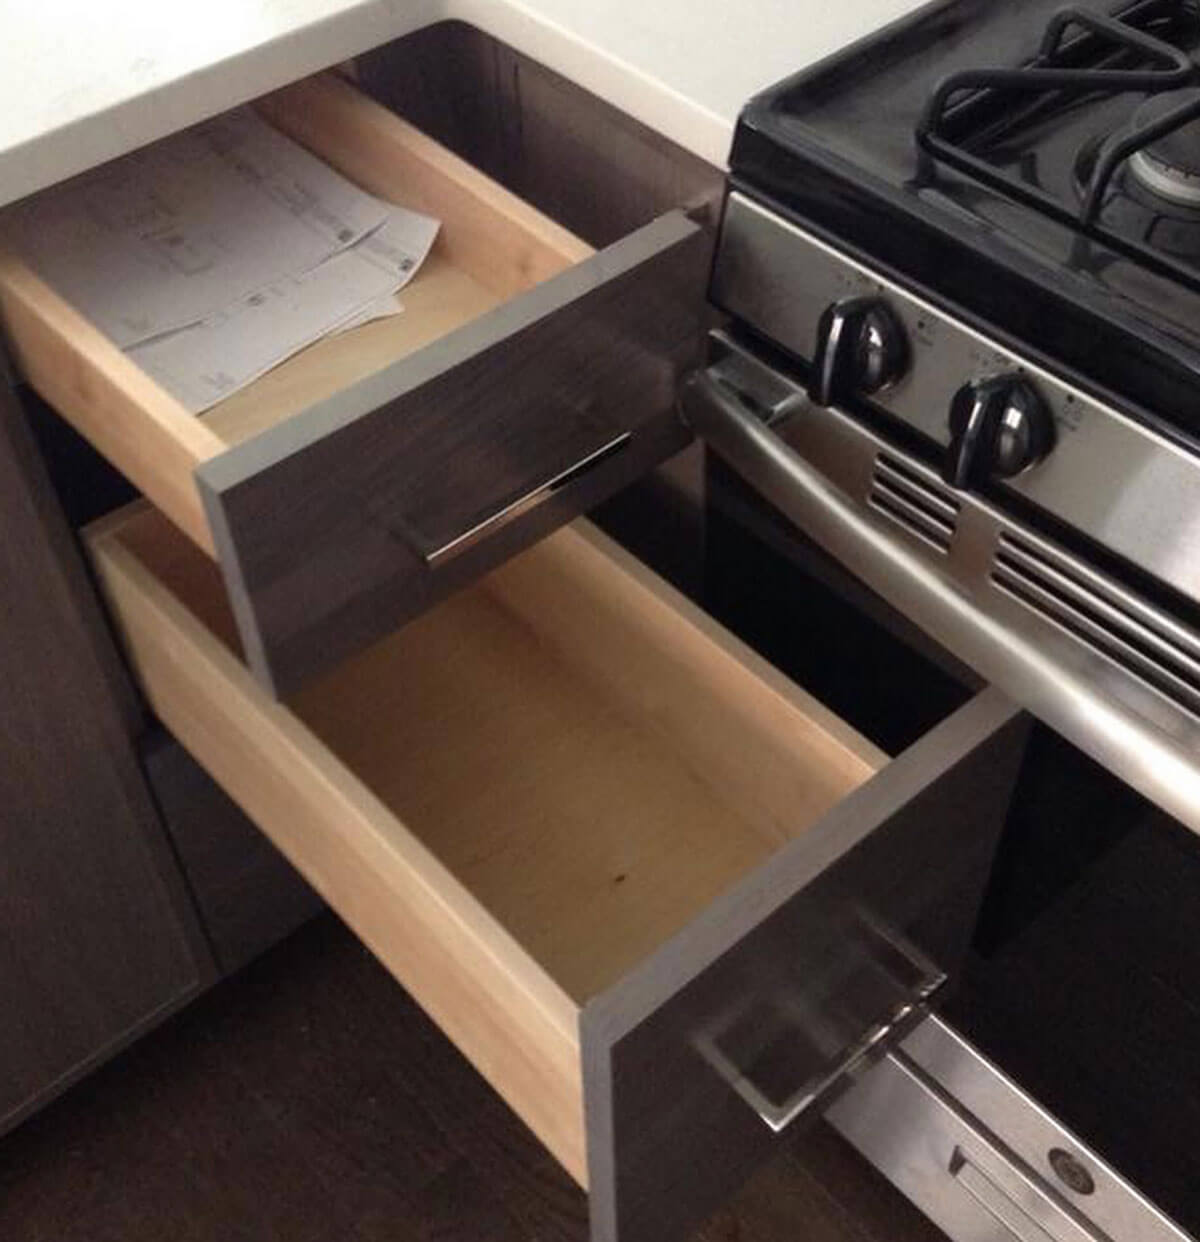 A kitchen drawer bumping into the appliance handle of an oven.